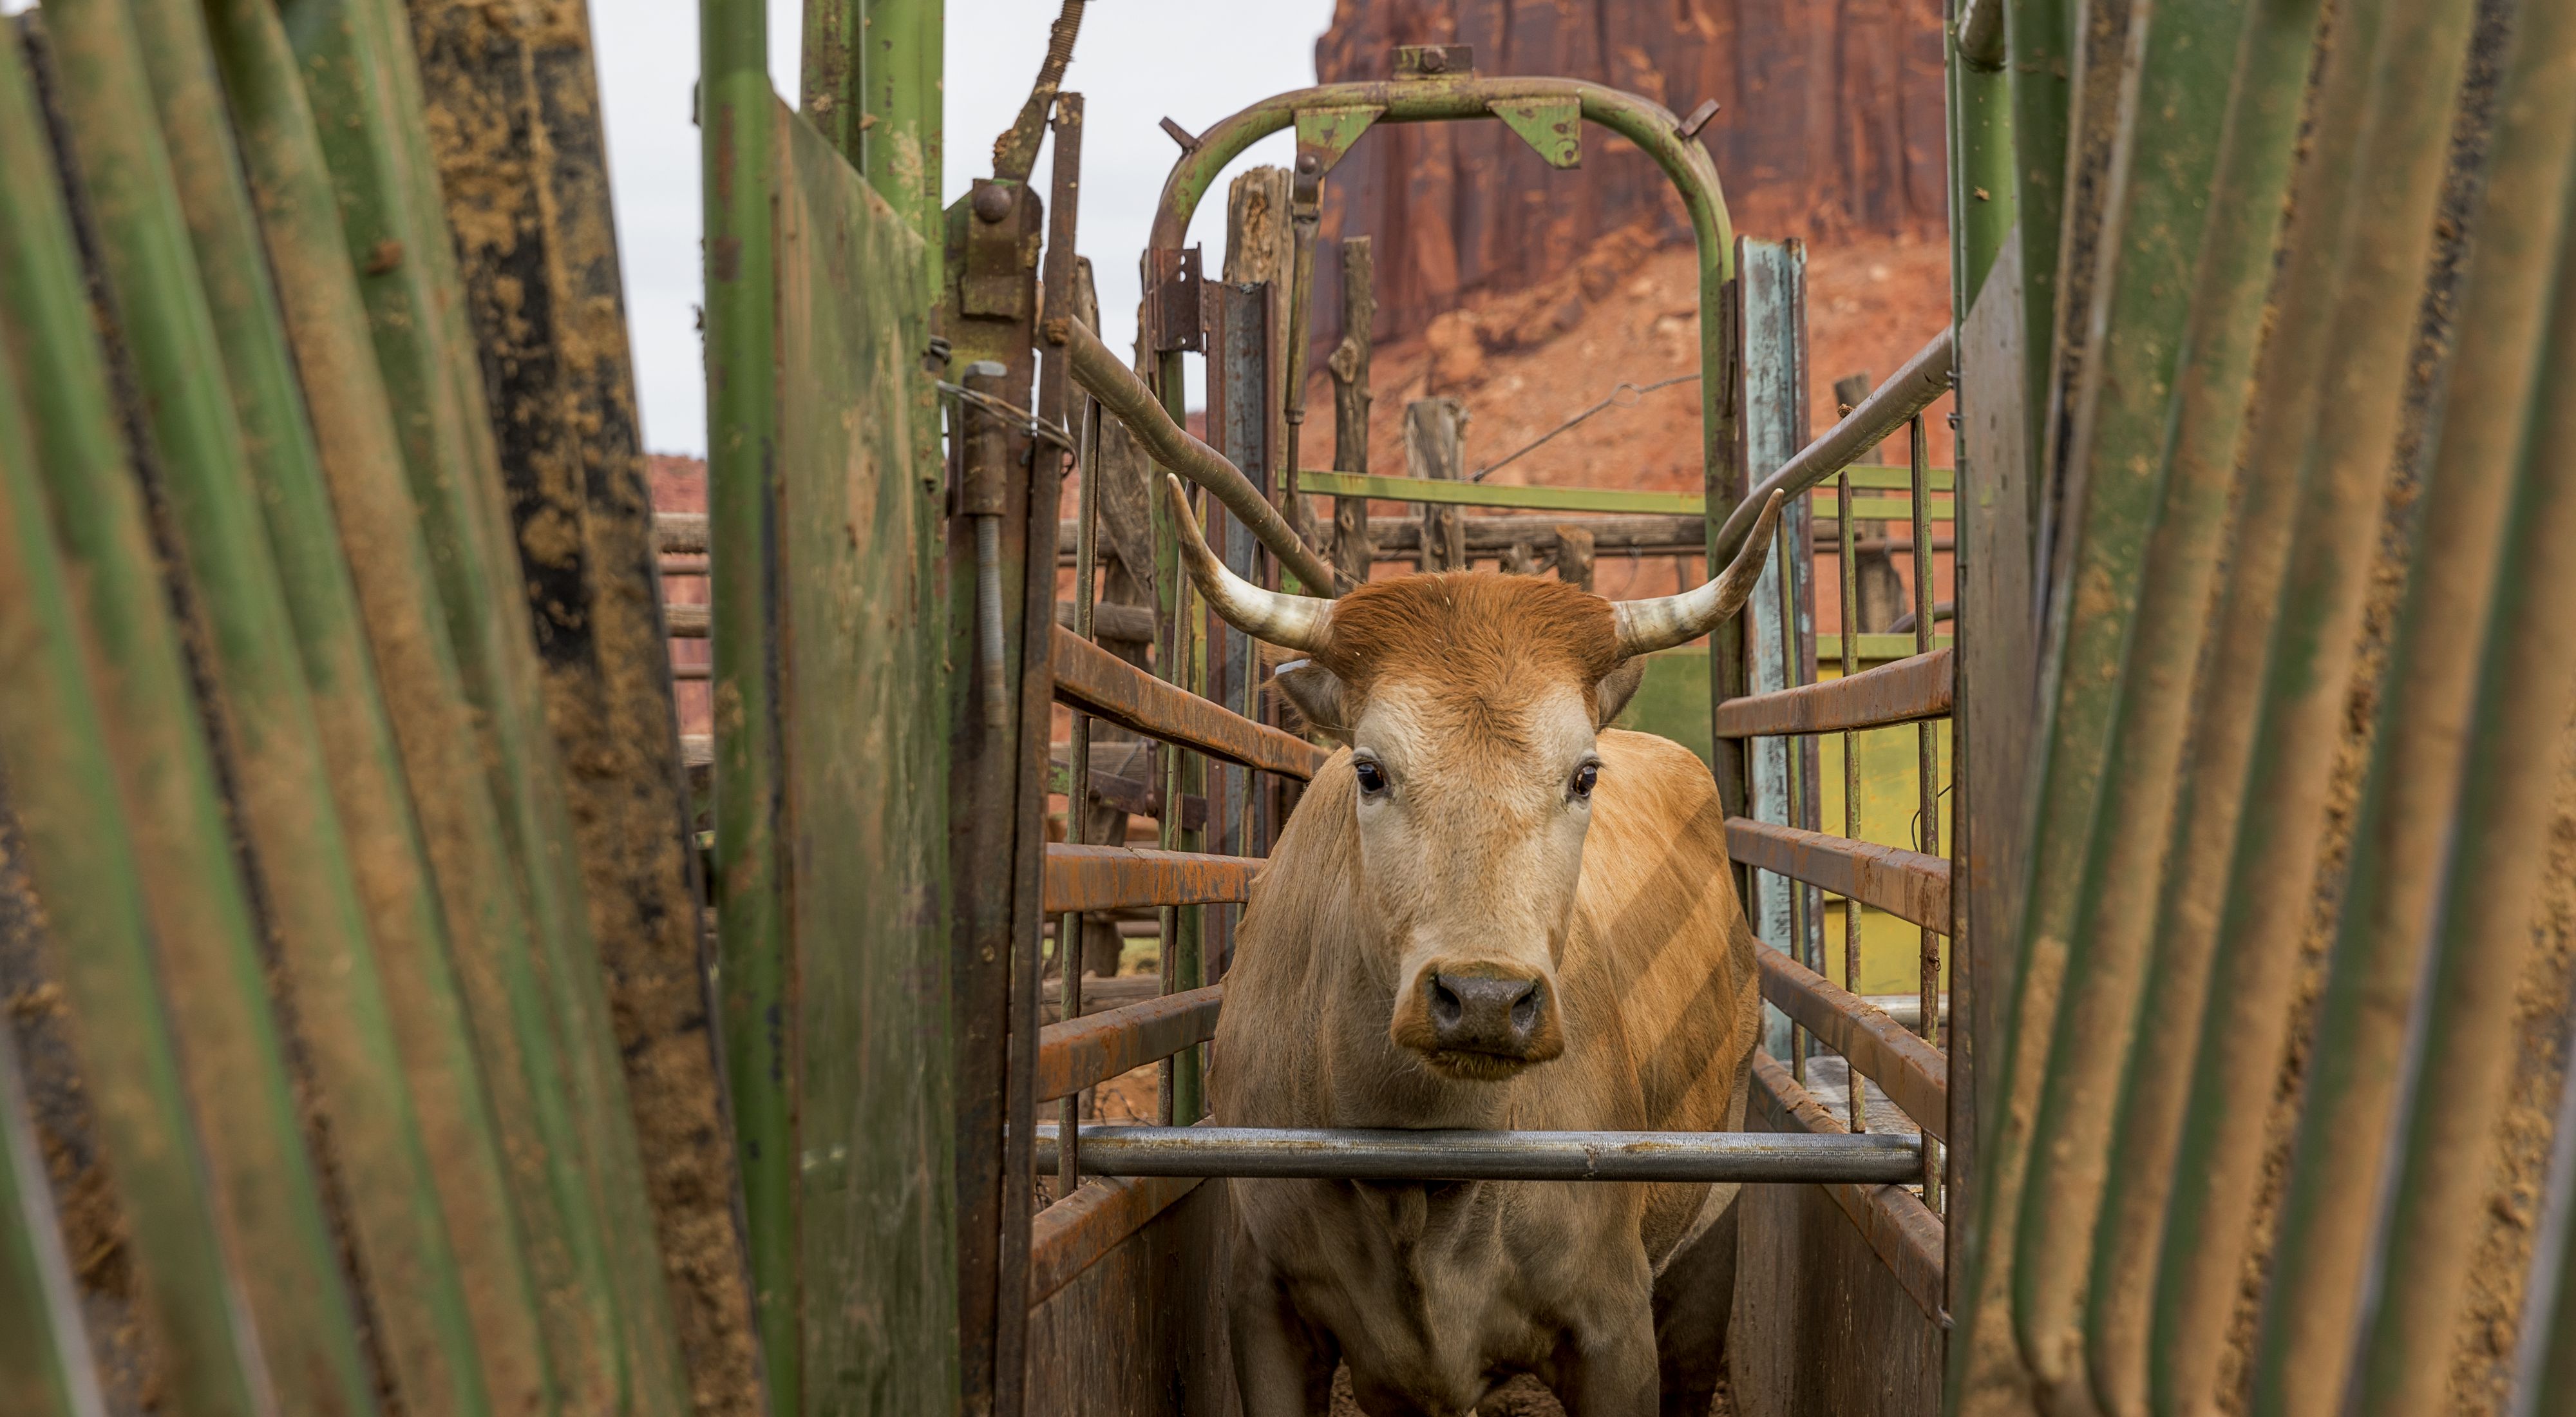 Close up of a small brown cow with short horns standing in a cattle chute. Cow looks straight at camera.